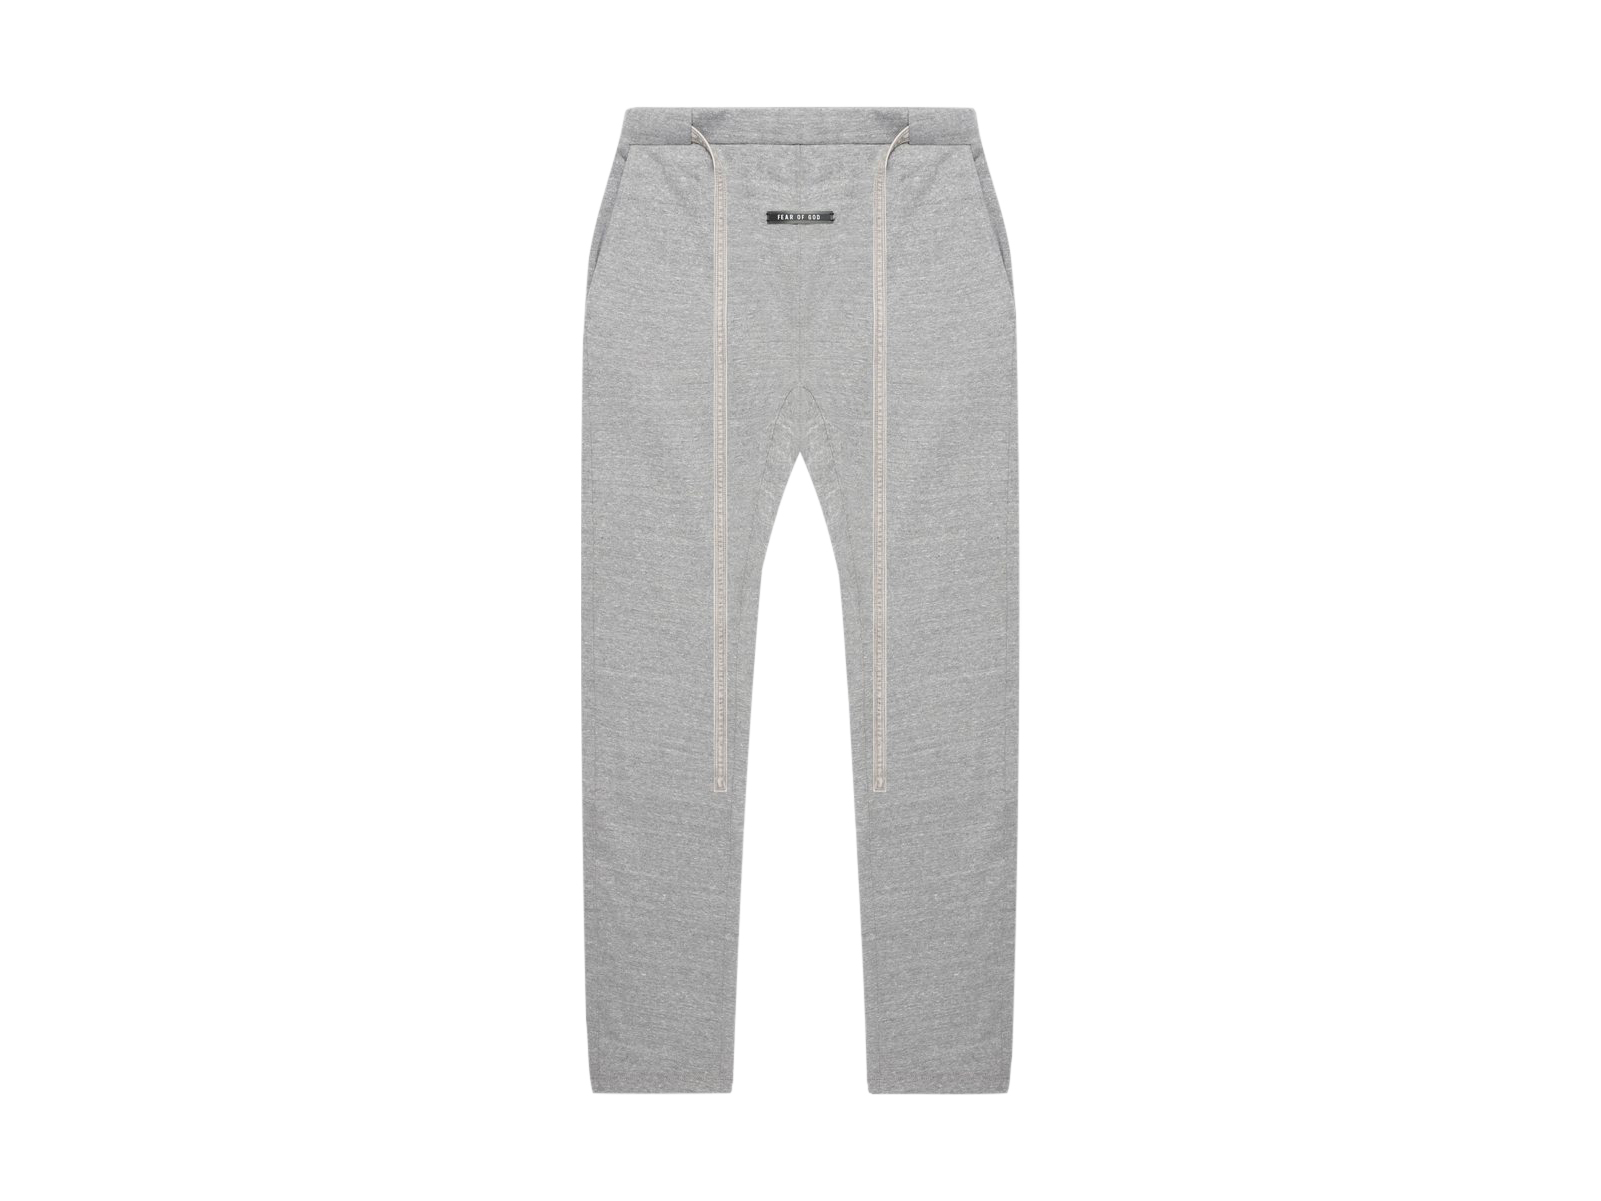 FEAR OF GOD Relaxed Sweatpants Heather Grey - SIXTH COLLECTION - US